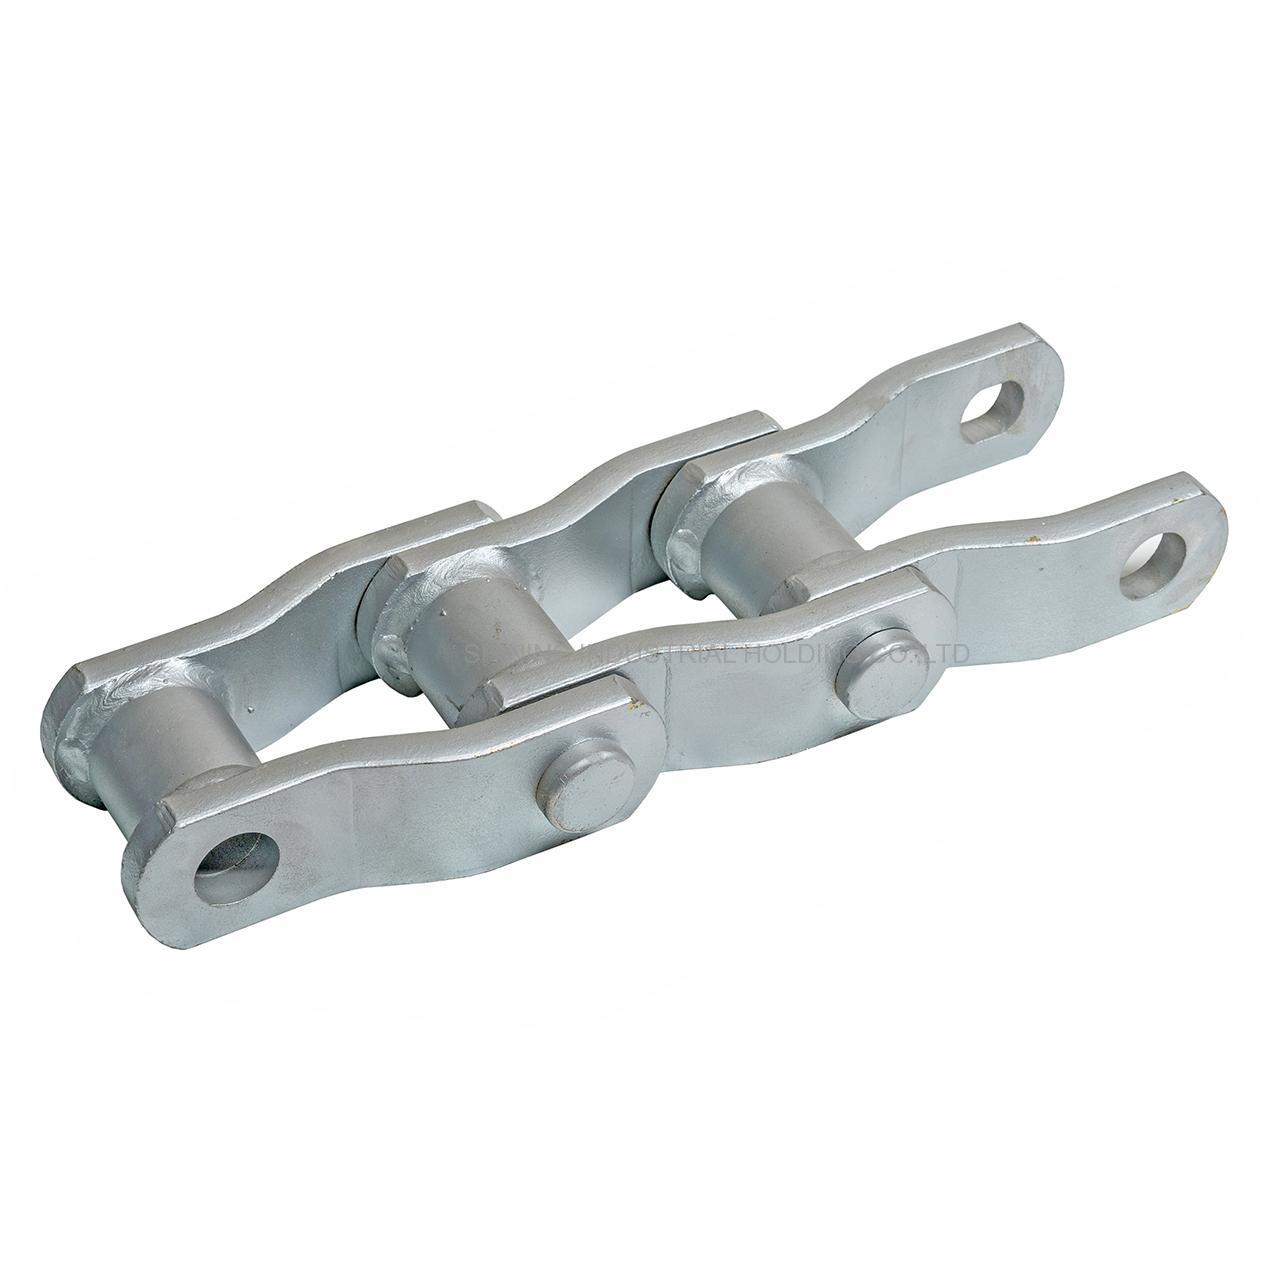 WH124XHD WR124XHD Welded chain